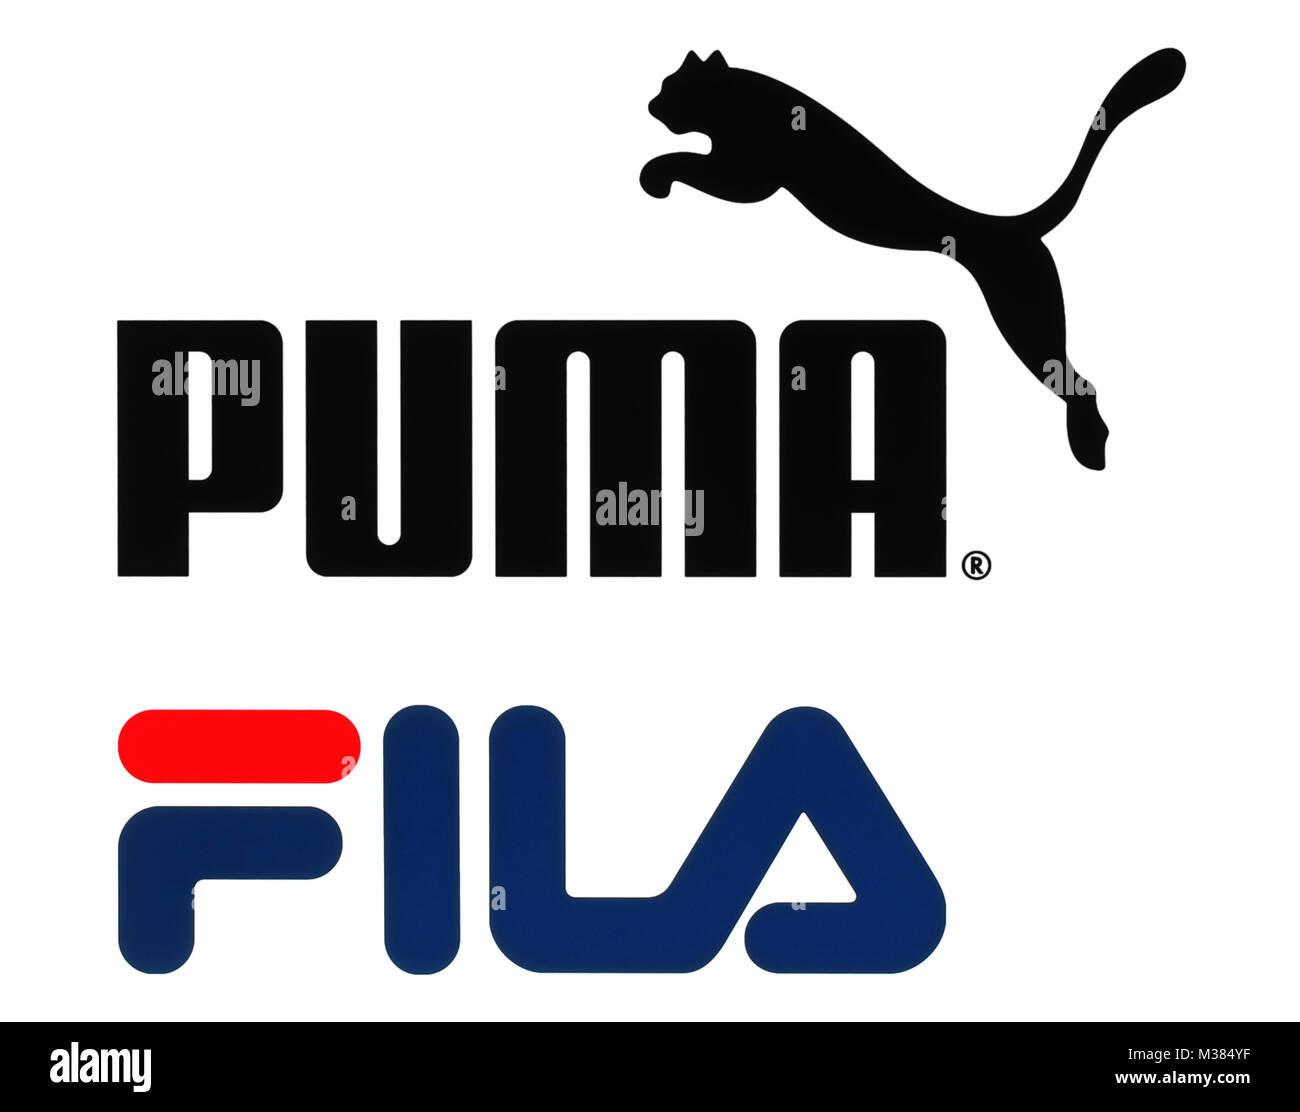 Fila Logo Resolution Stock and Images - Alamy